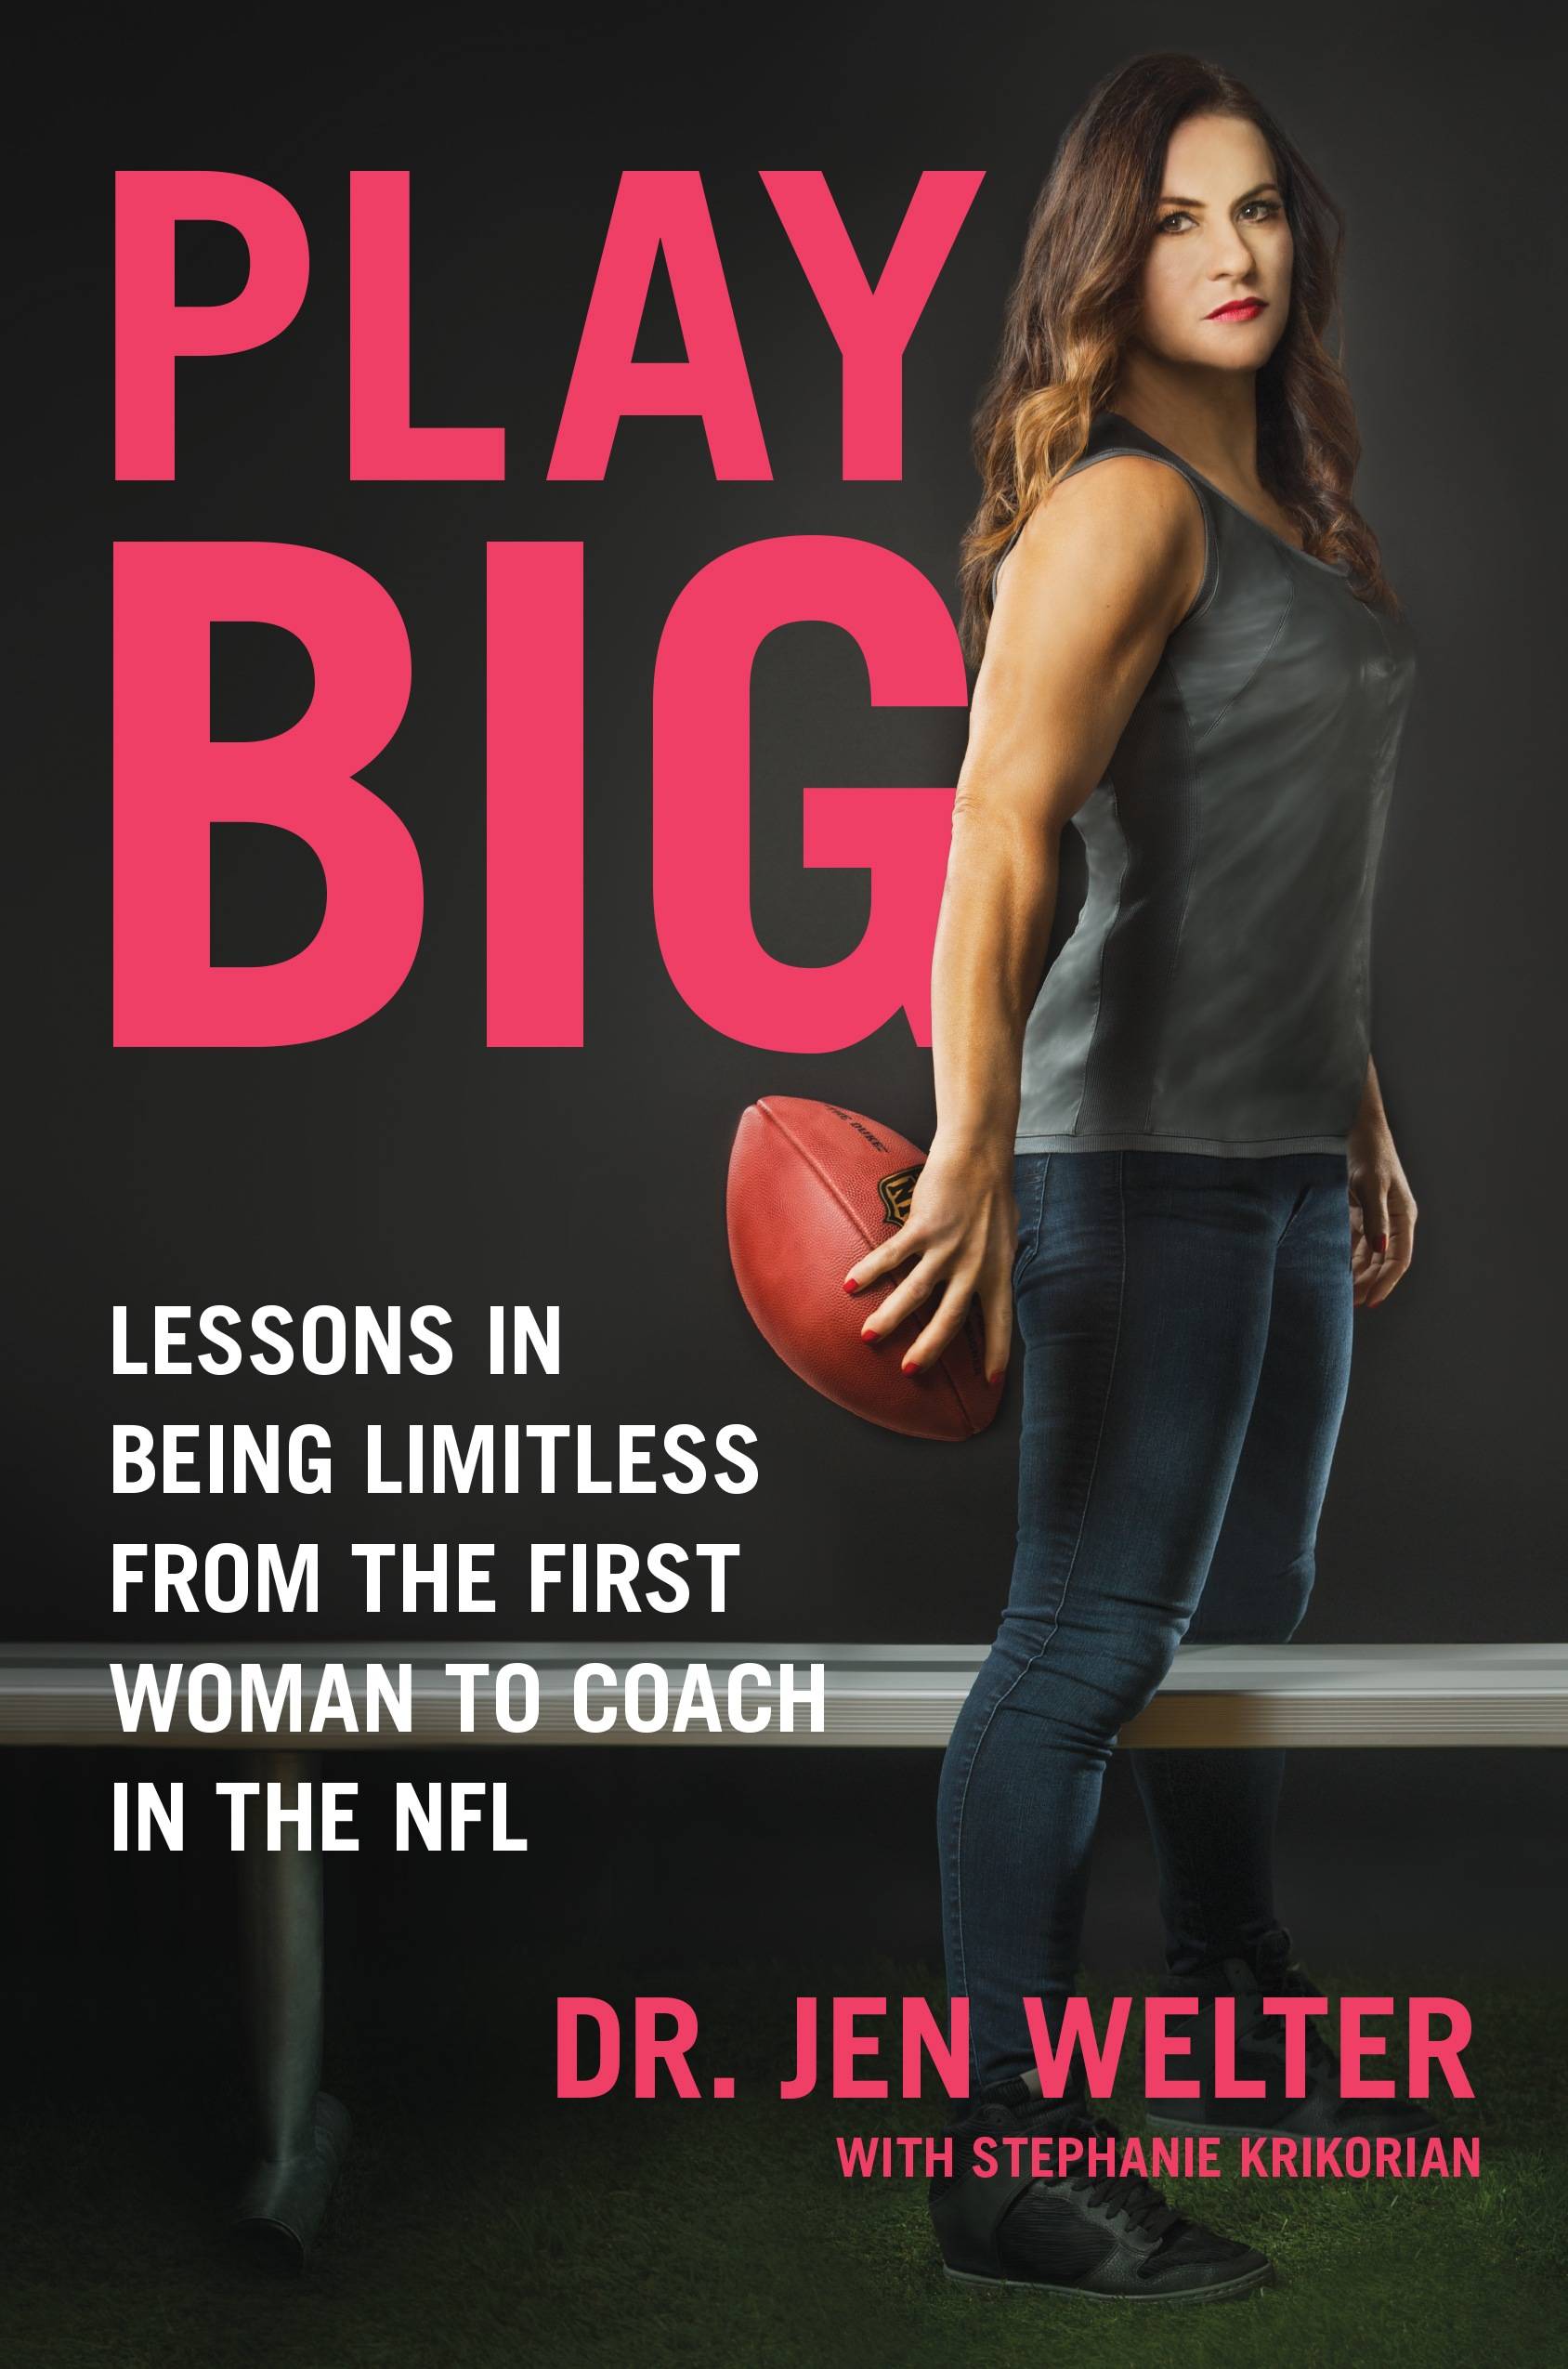 The Bookworm Sez: ‘Play Big’ is a good call